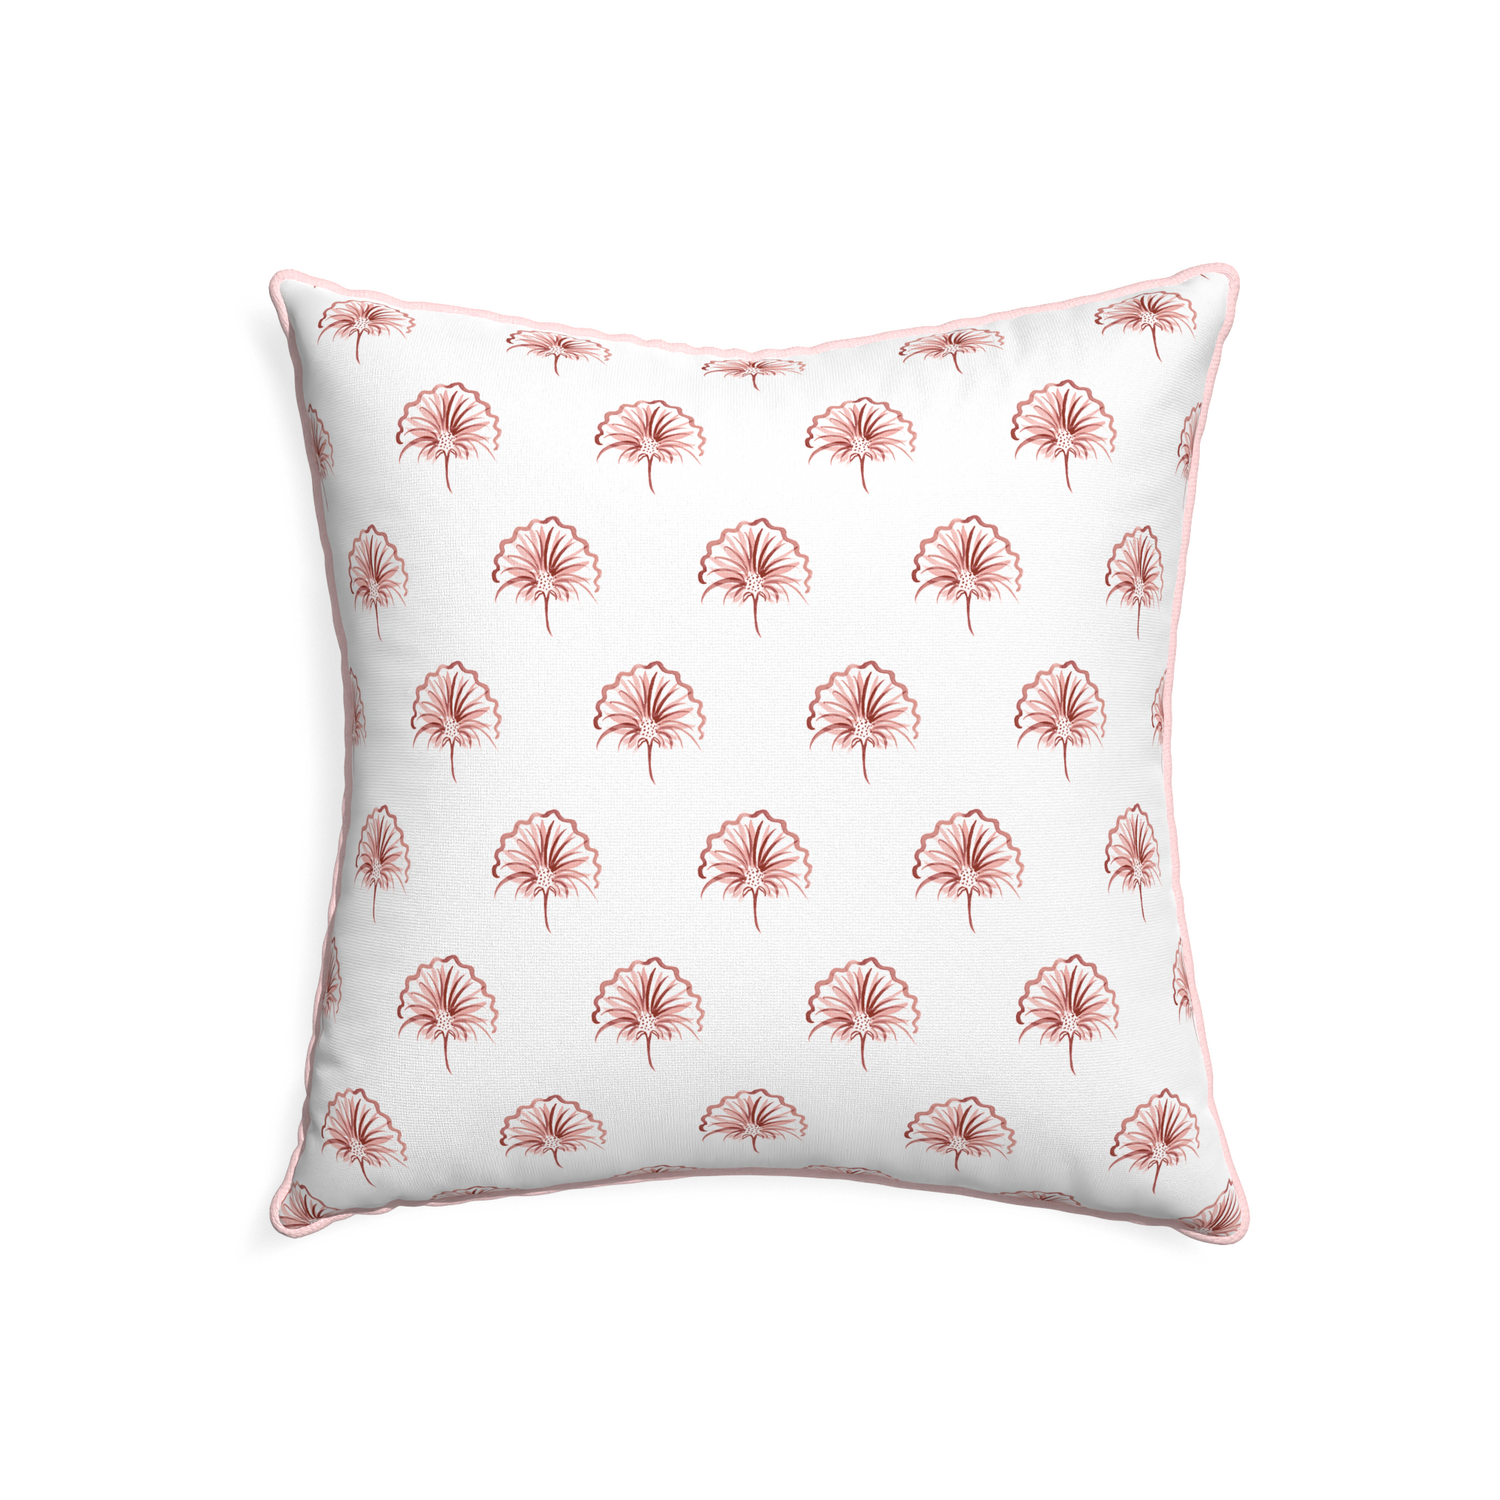 22-square penelope rose custom pillow with petal piping on white background